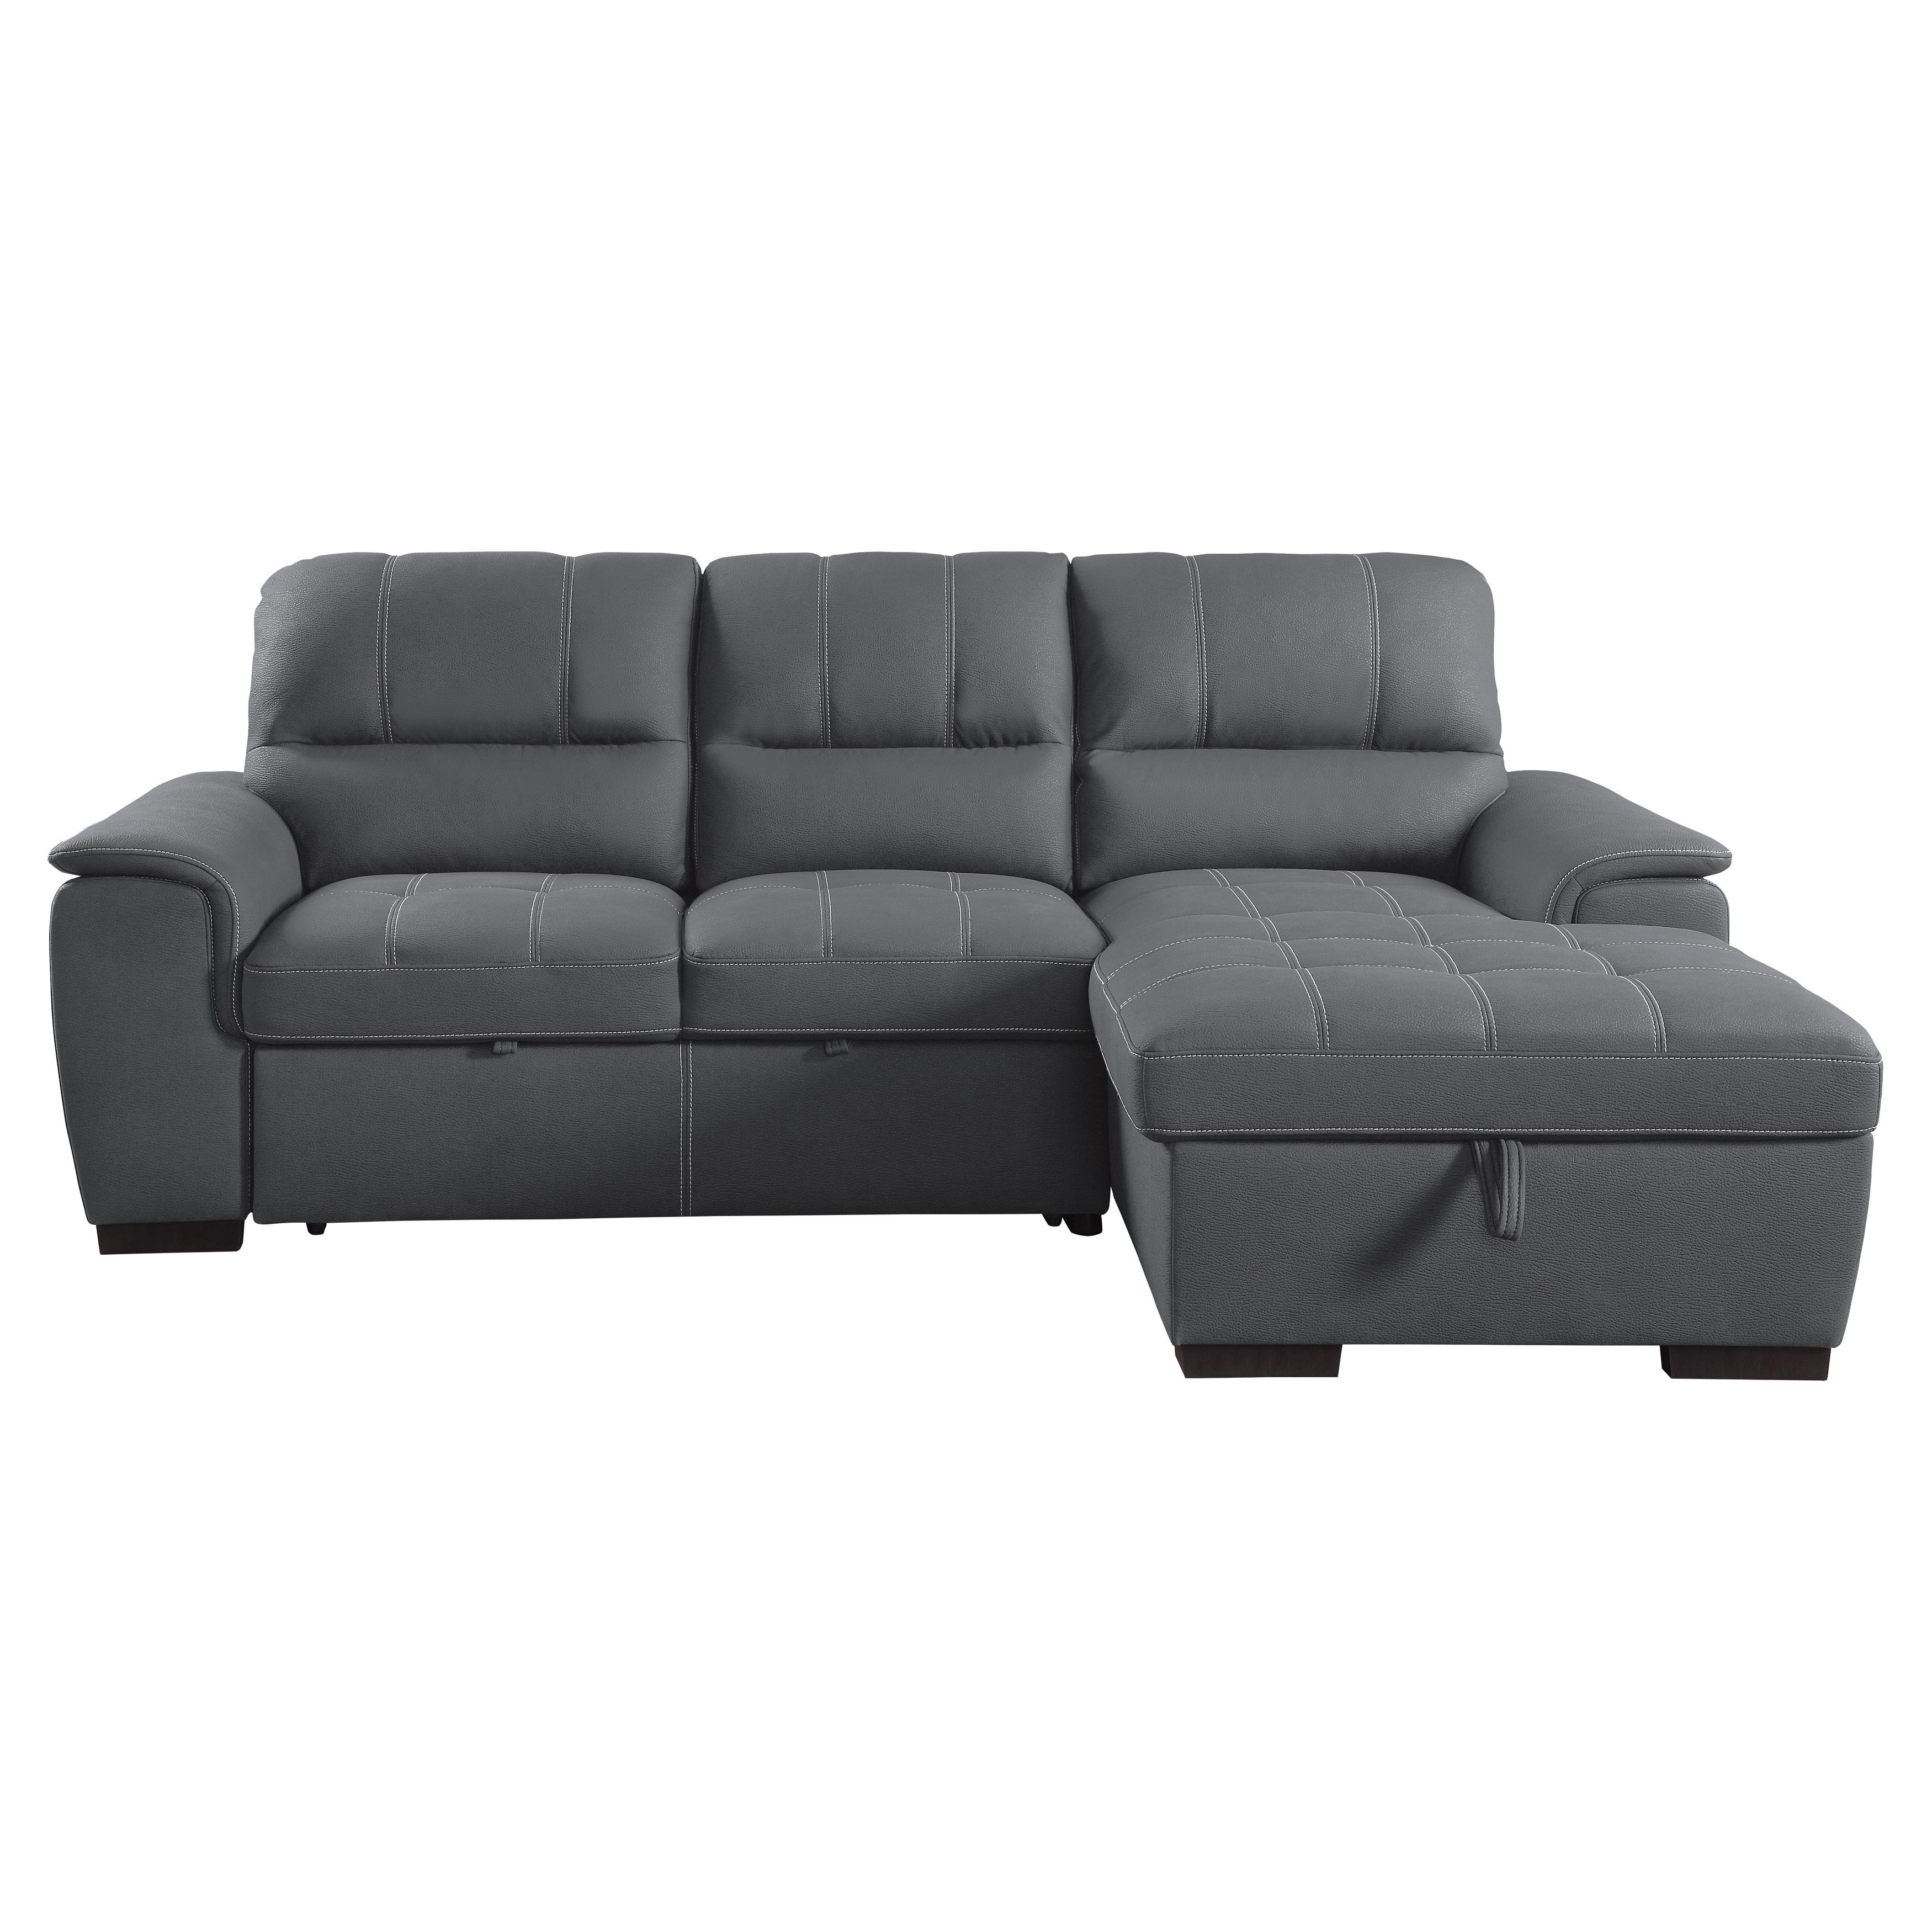 Transitional Sectional 9858GY*SC Andes 9858GY*SC in Gray Microfiber